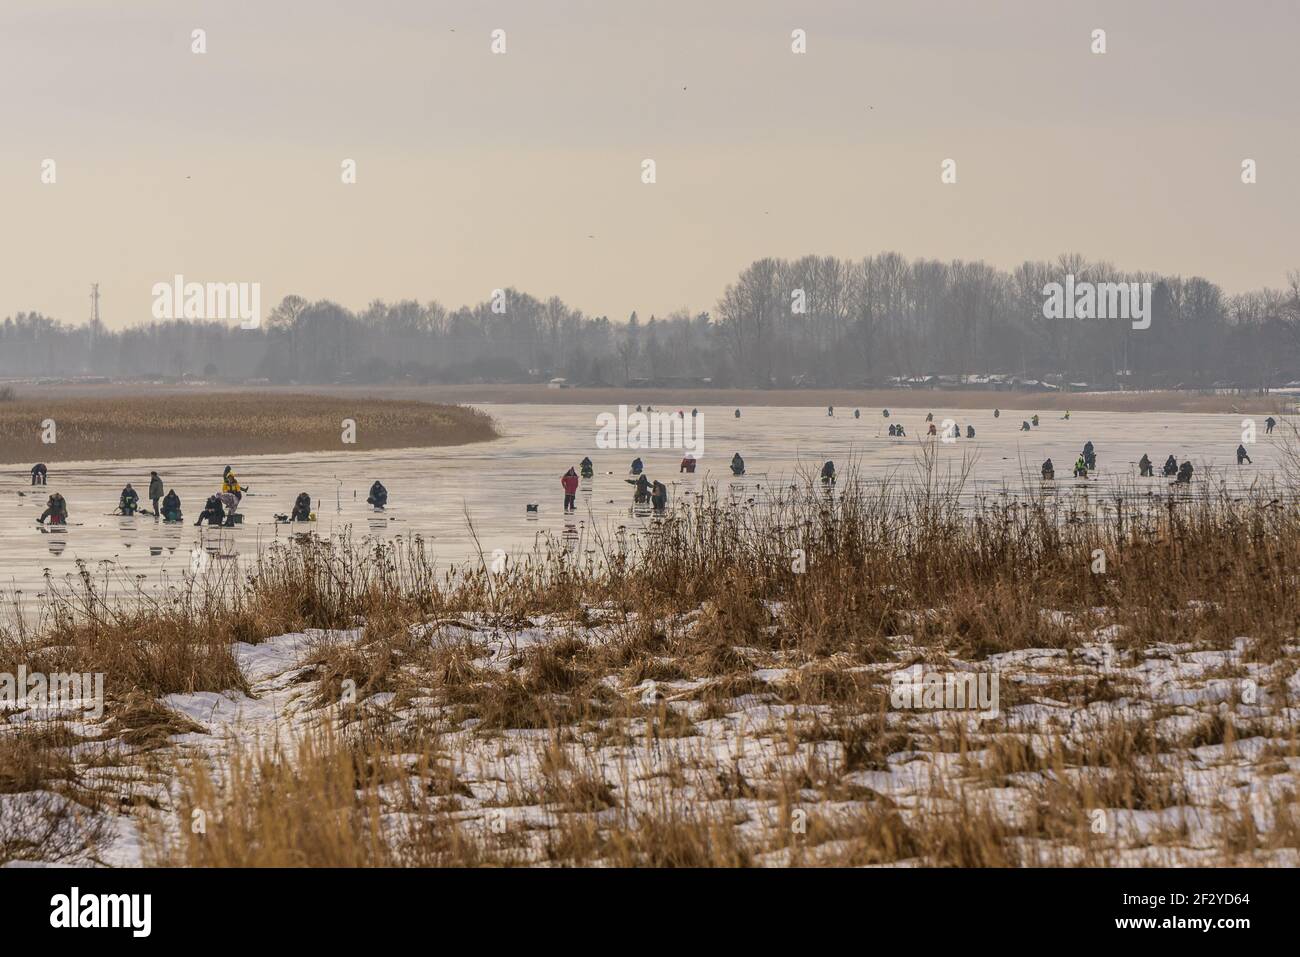 frozen river, bent and icy anglers fishing or moving along a frozen river in search of better fishing spots to catch more fish Stock Photo